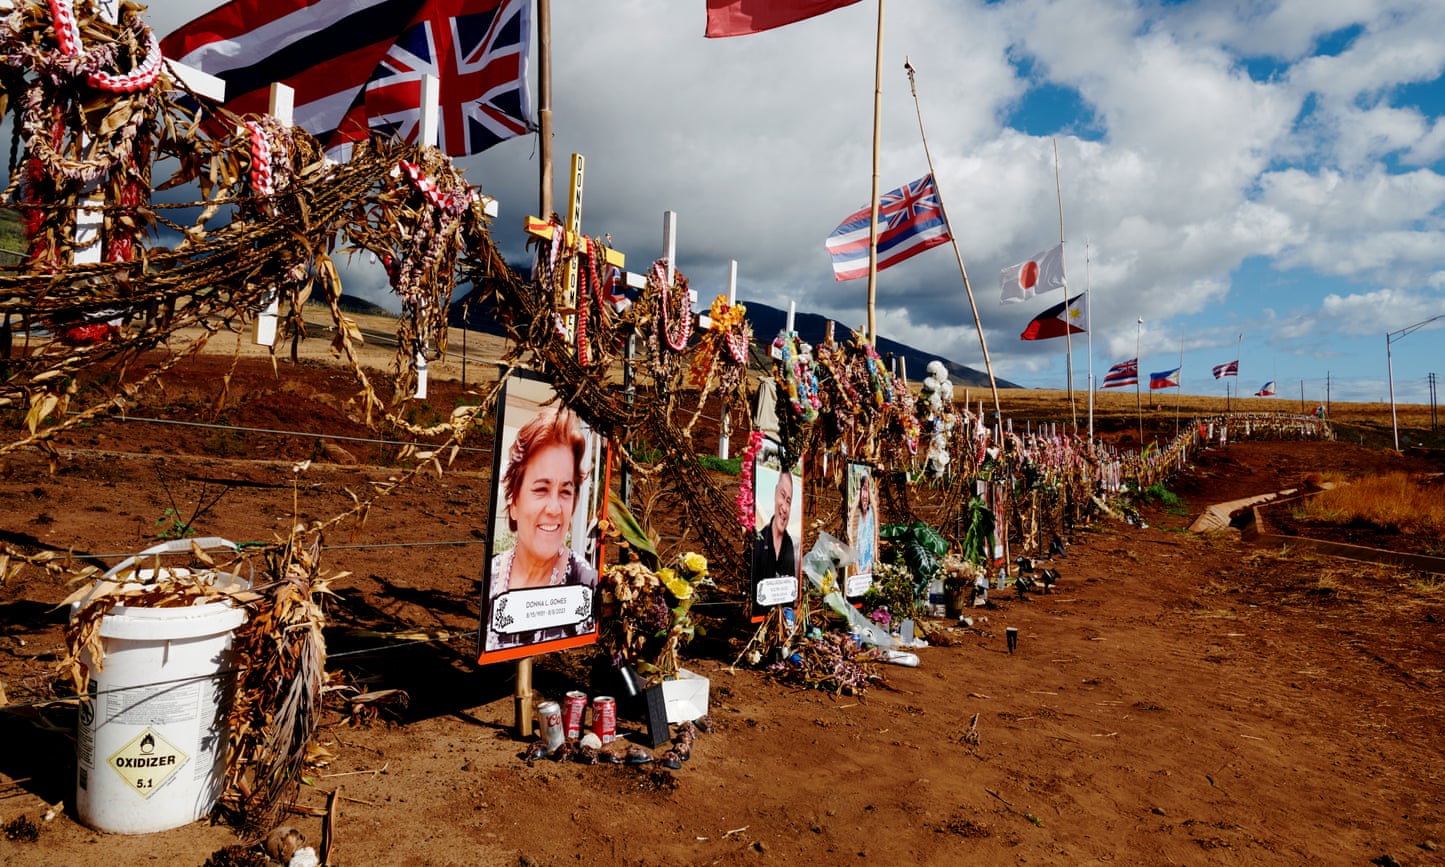 Along a wire fence are fastened a long row of white crosses, flags and images, with one woman’s smiling face most visible.